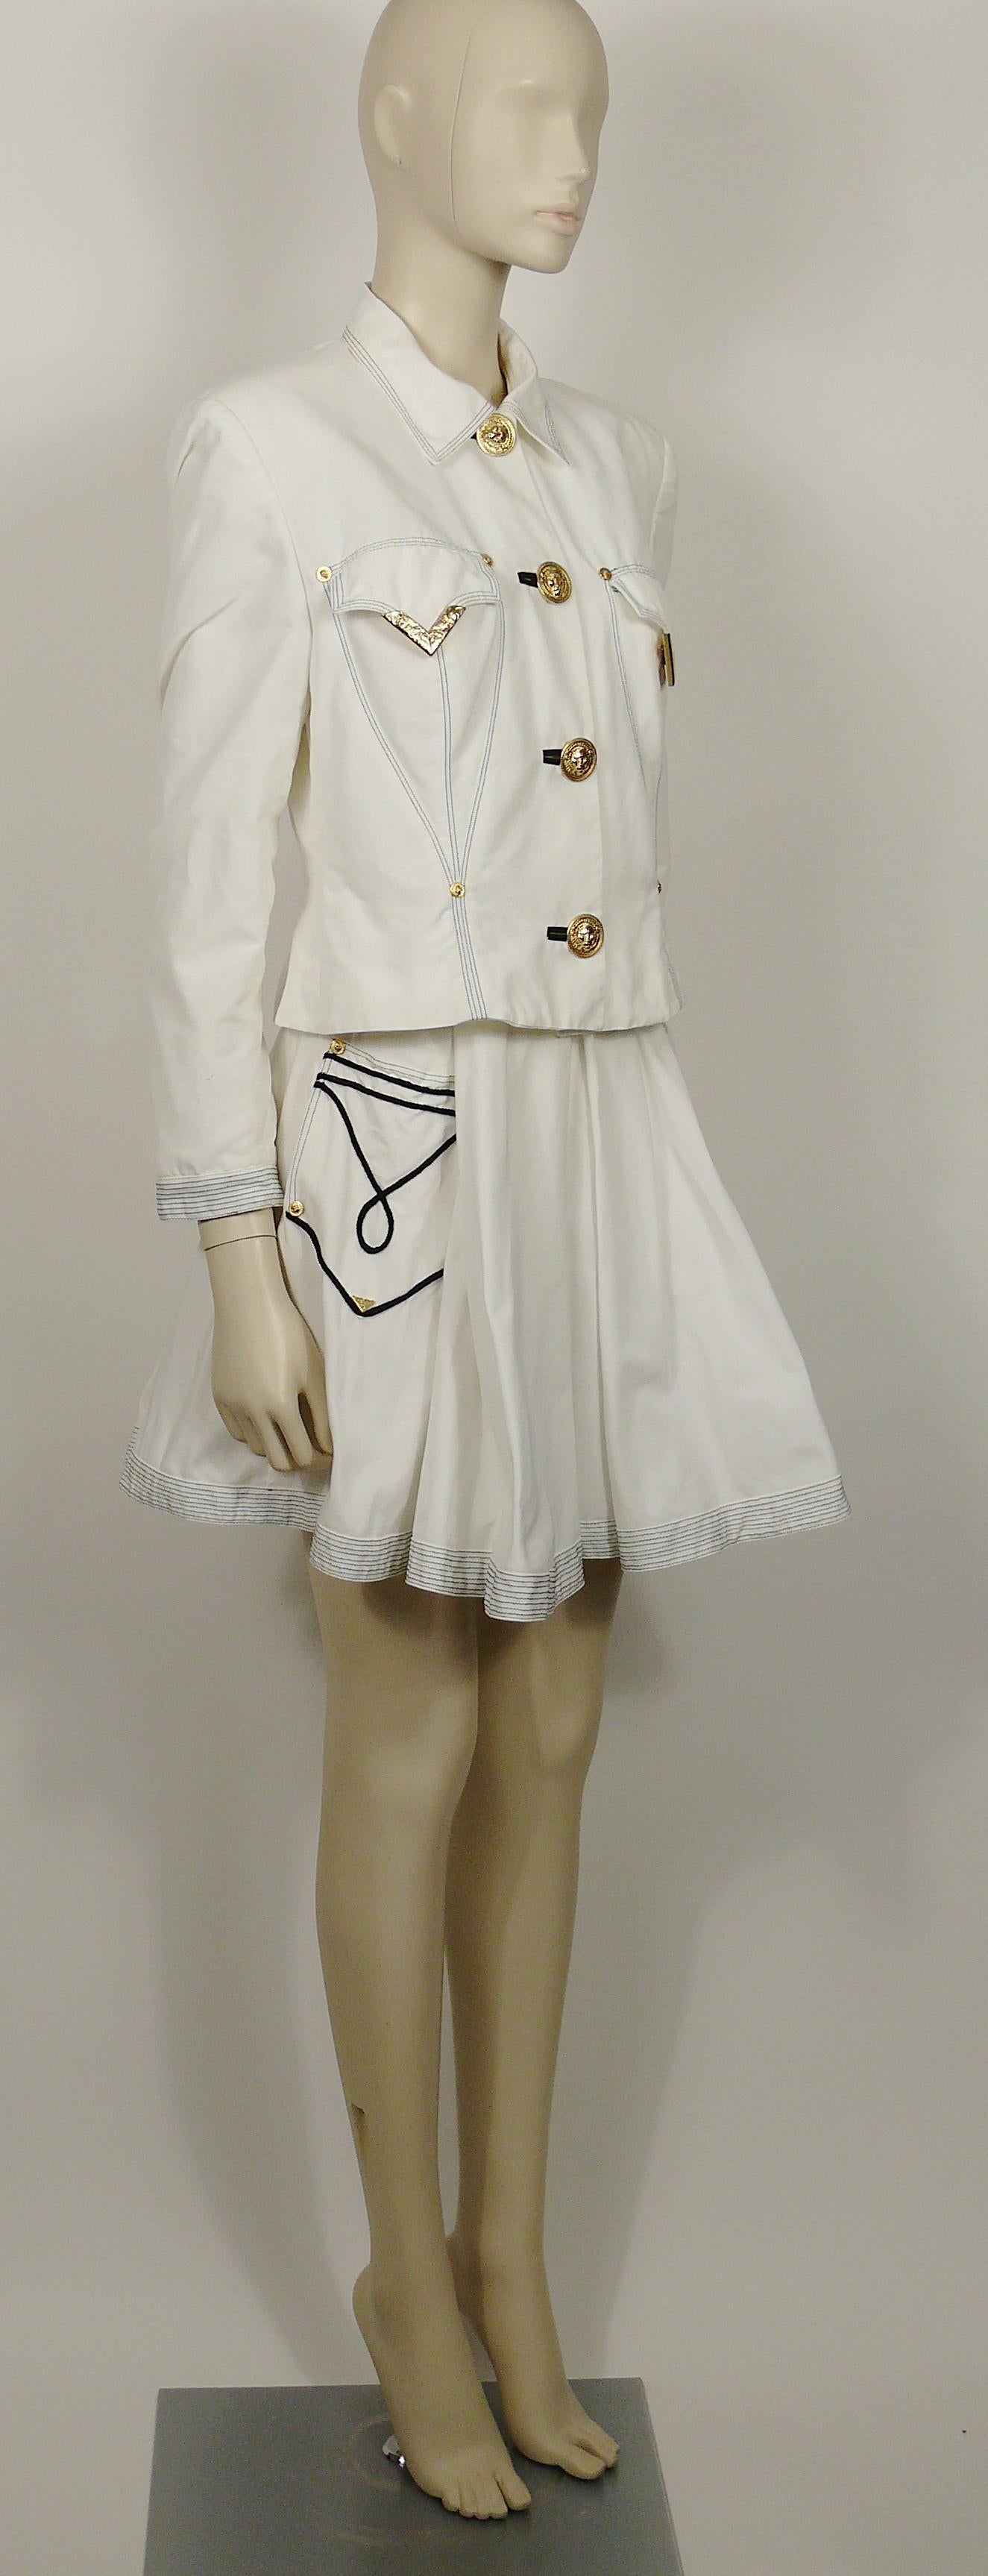 GIANNI VERSACE VERSUS vintage 1990s white jacket and skirt ensemble featuring Western details.

The jacket features :
- White cotton with black stitching details.
- Long sleeves.
- Shoulder pads.
- Classic collar.
- Oversized lion head button down